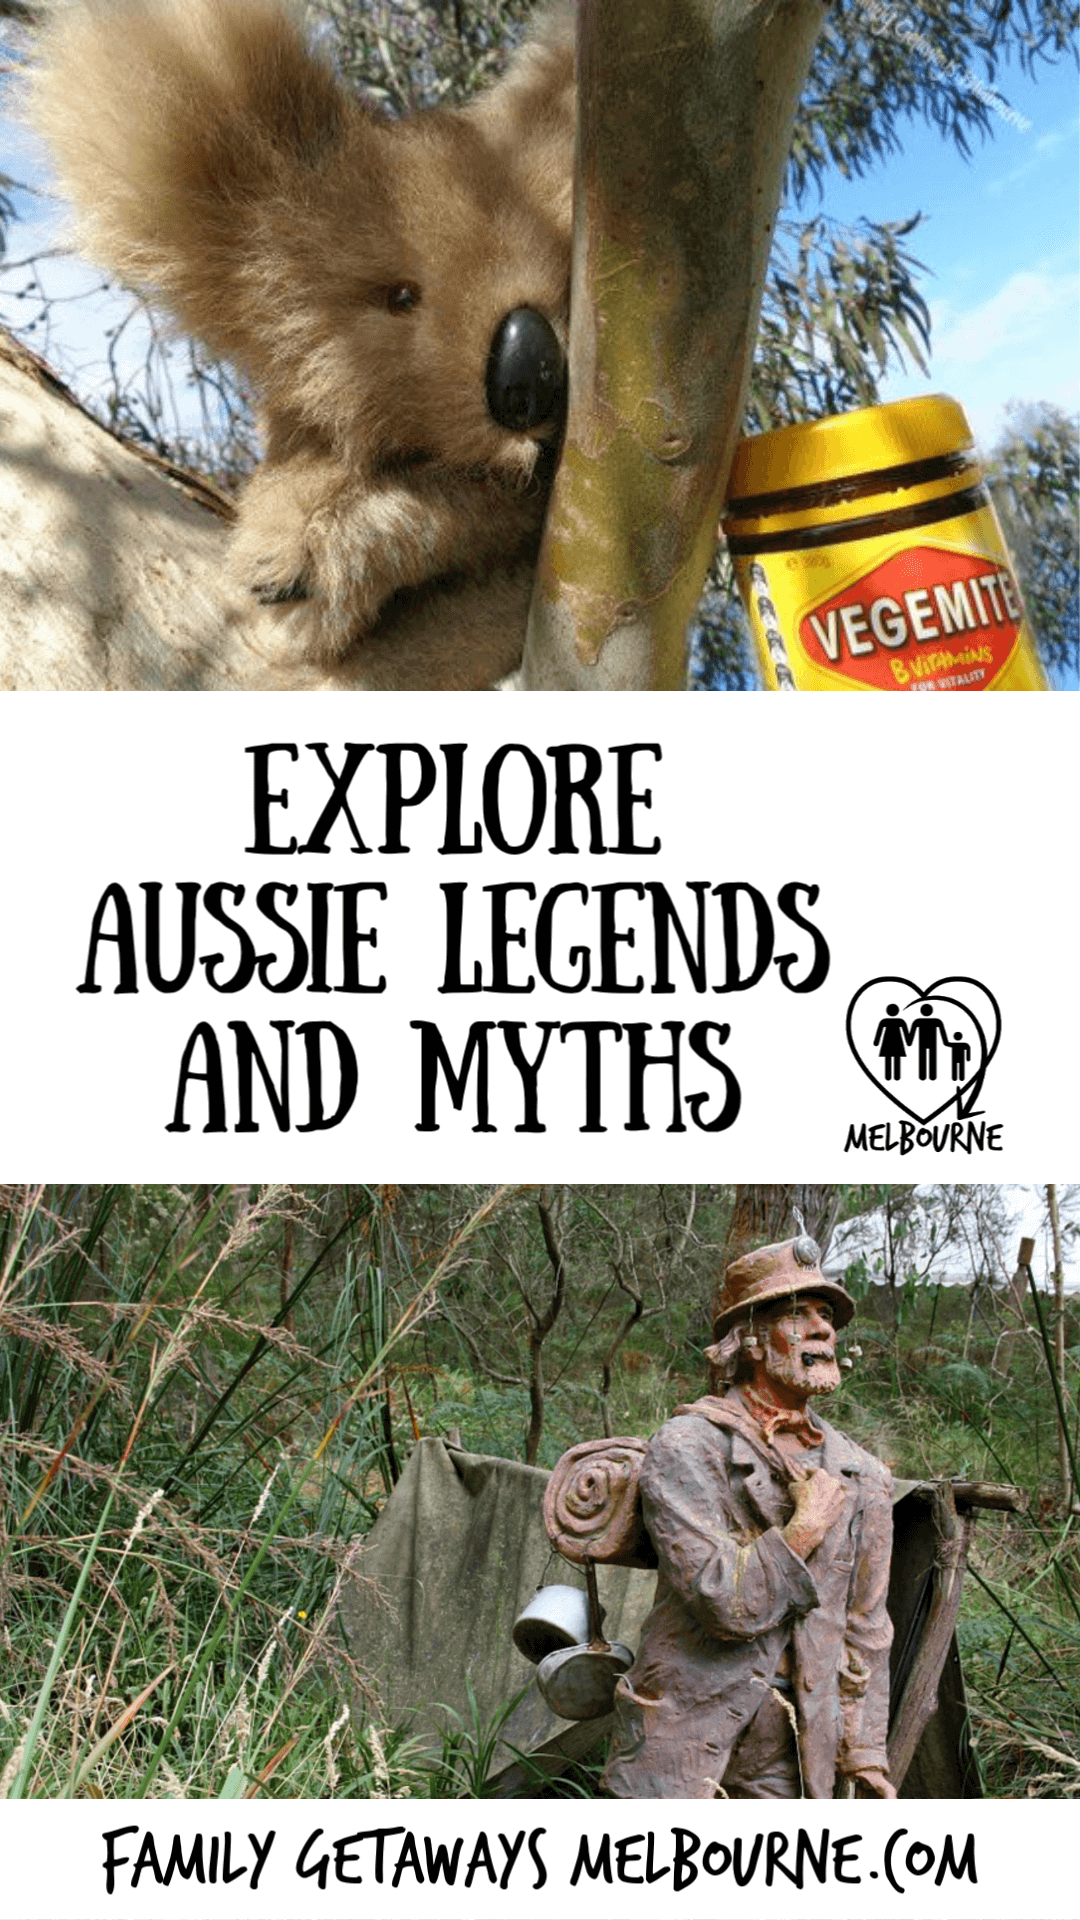 https://www.family-getaways-melbourne.com/images/explore-legends-and-myths-pin.png